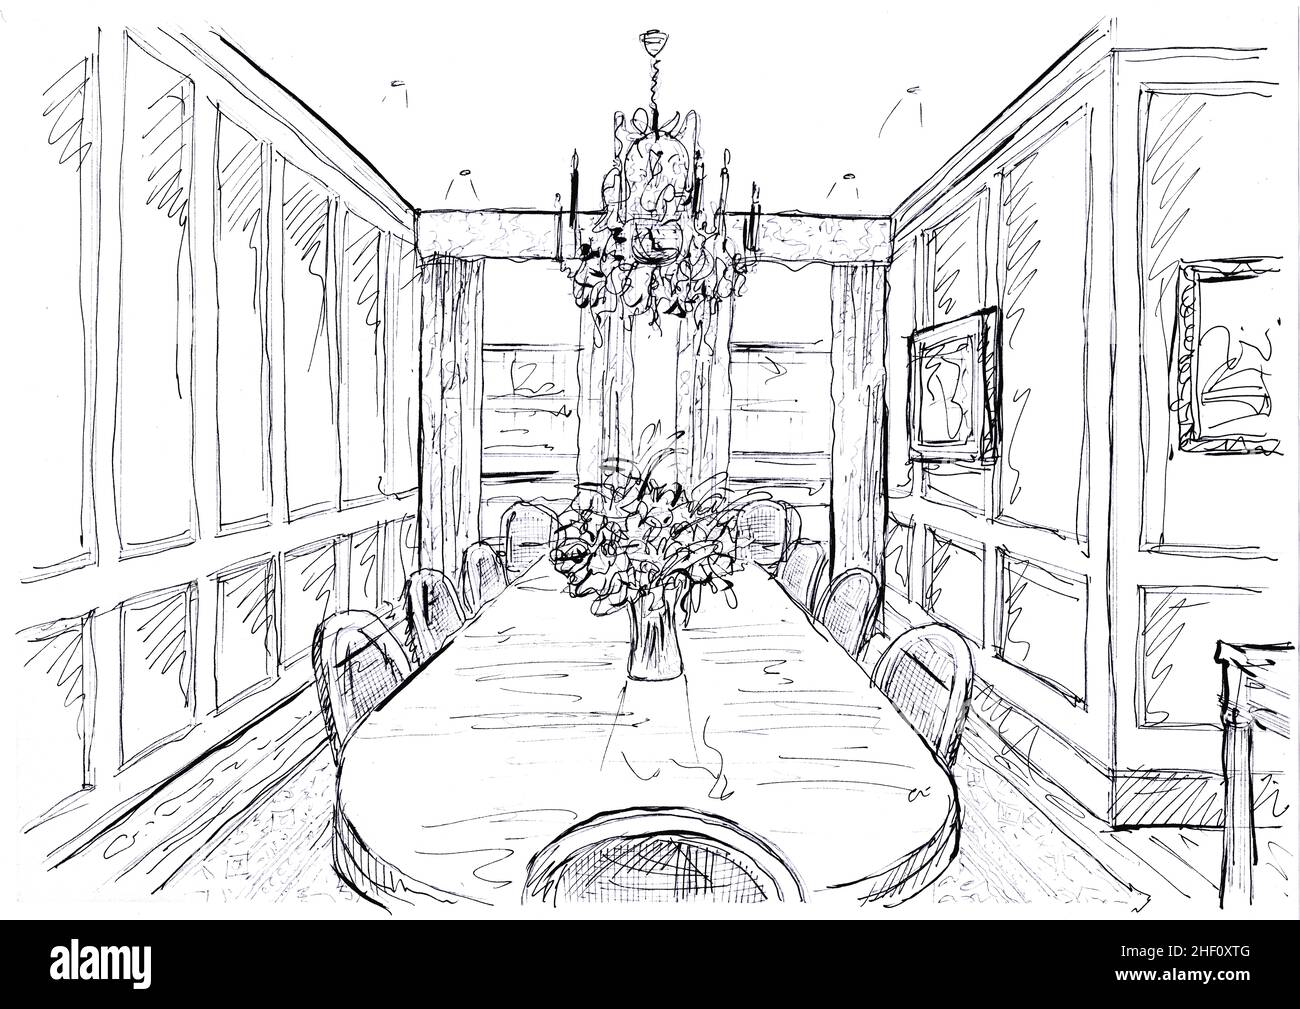 Dining Room Home Interior Graphic Black White Vertical Sketch Illustration  Vector Stock Illustration  Download Image Now  iStock